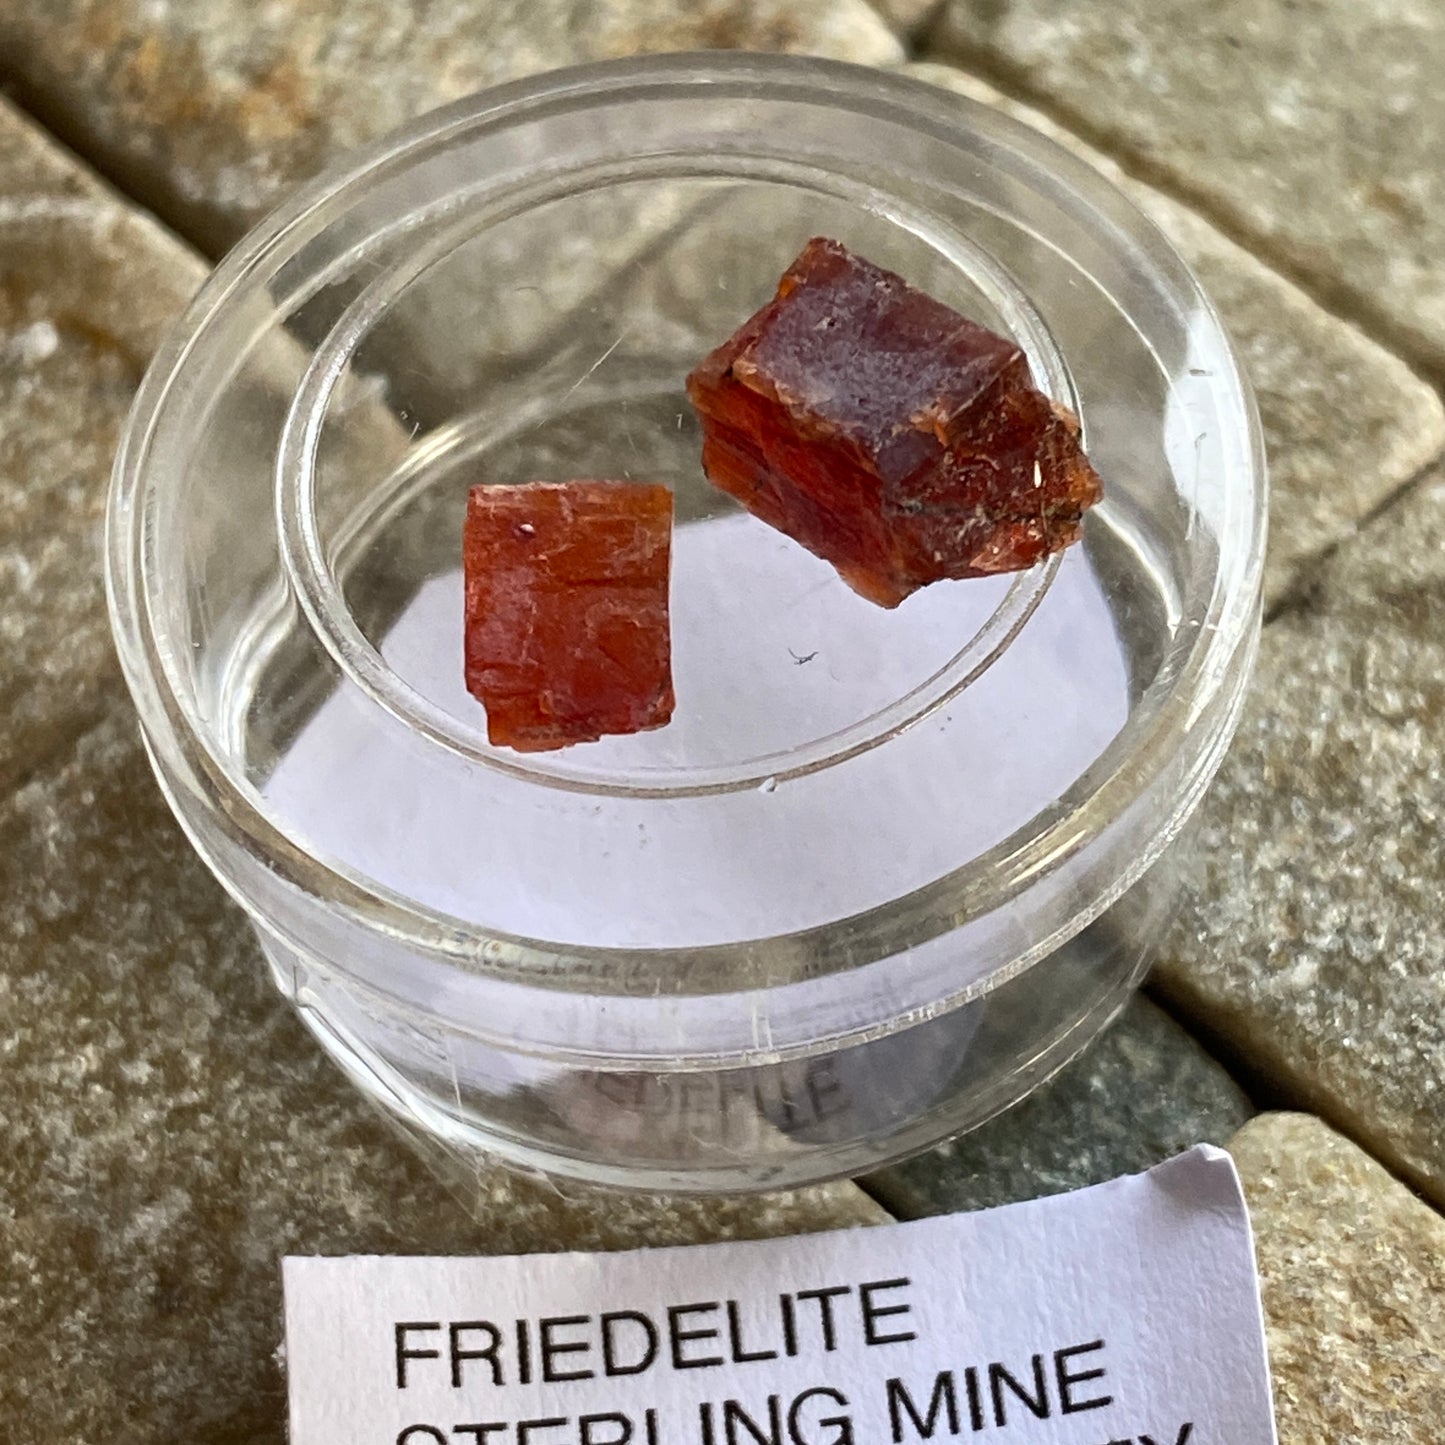 FRIEDELITE FROM STERLING MINE, NEW JERSEY, U.S.A.